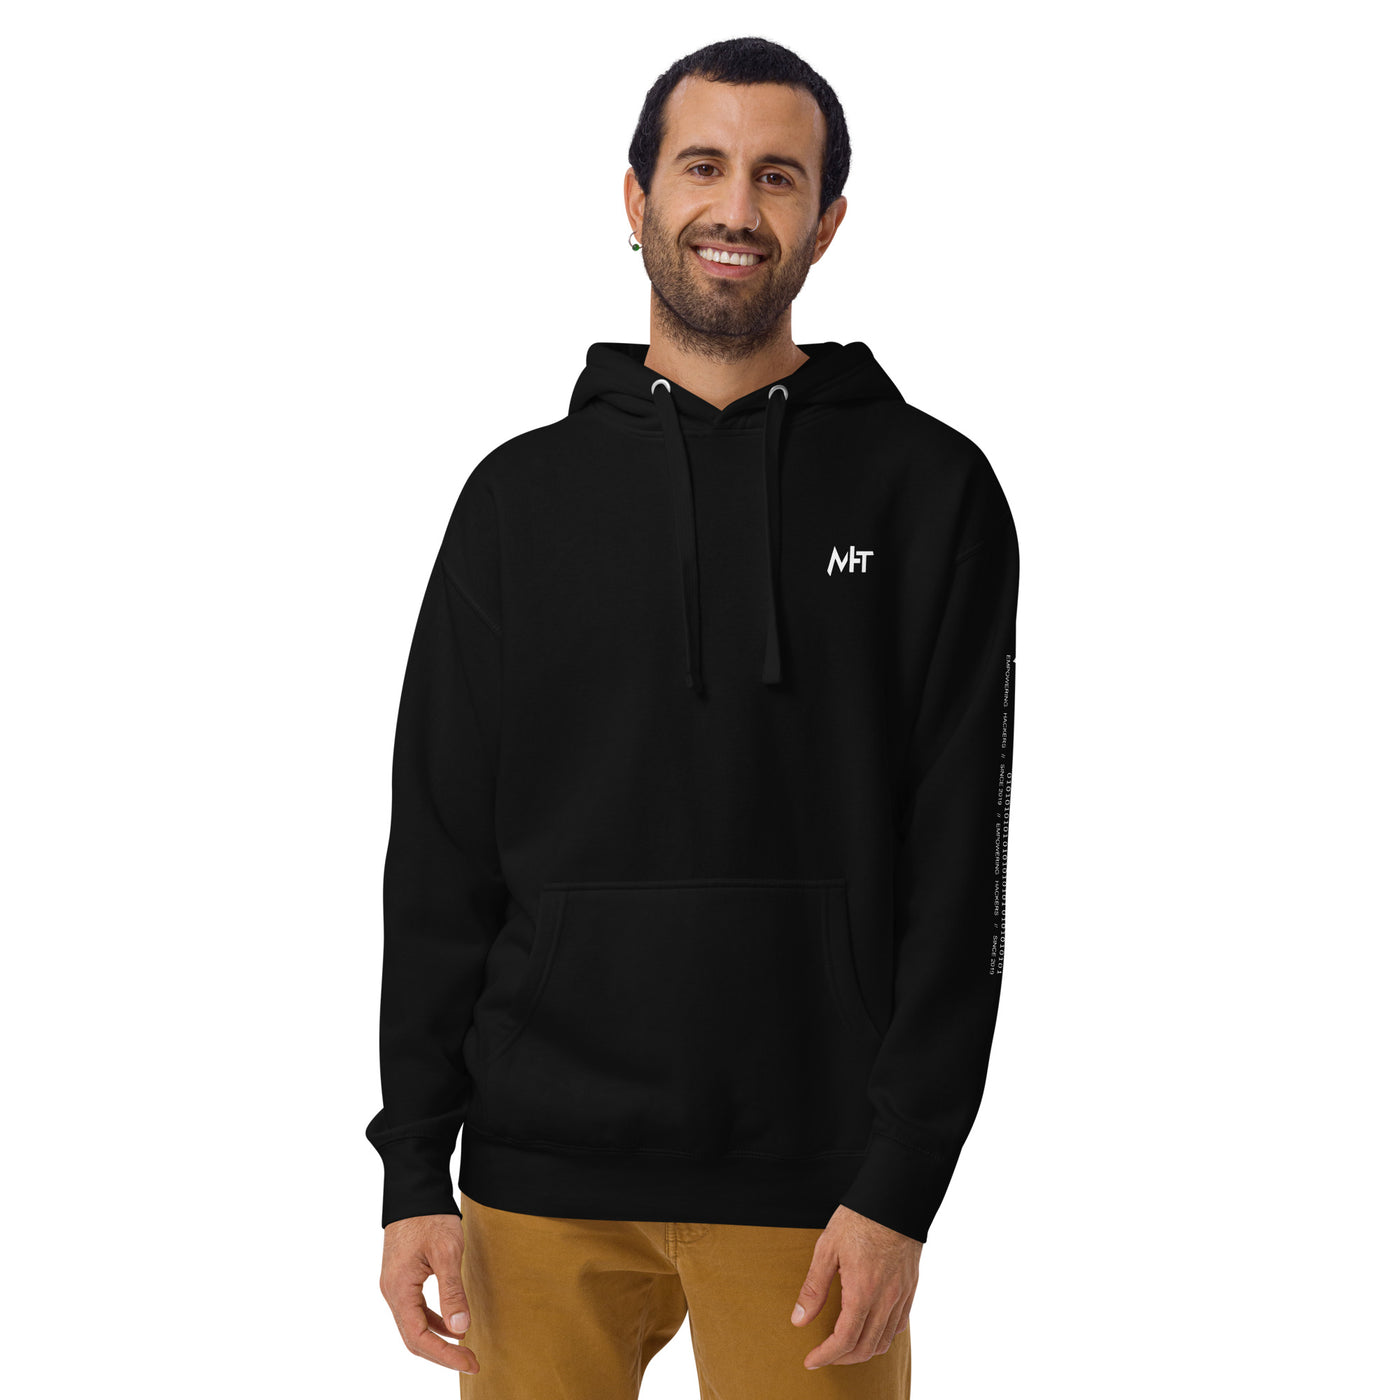 Trust me, your data is safe with me - Unisex Hoodie (back print)